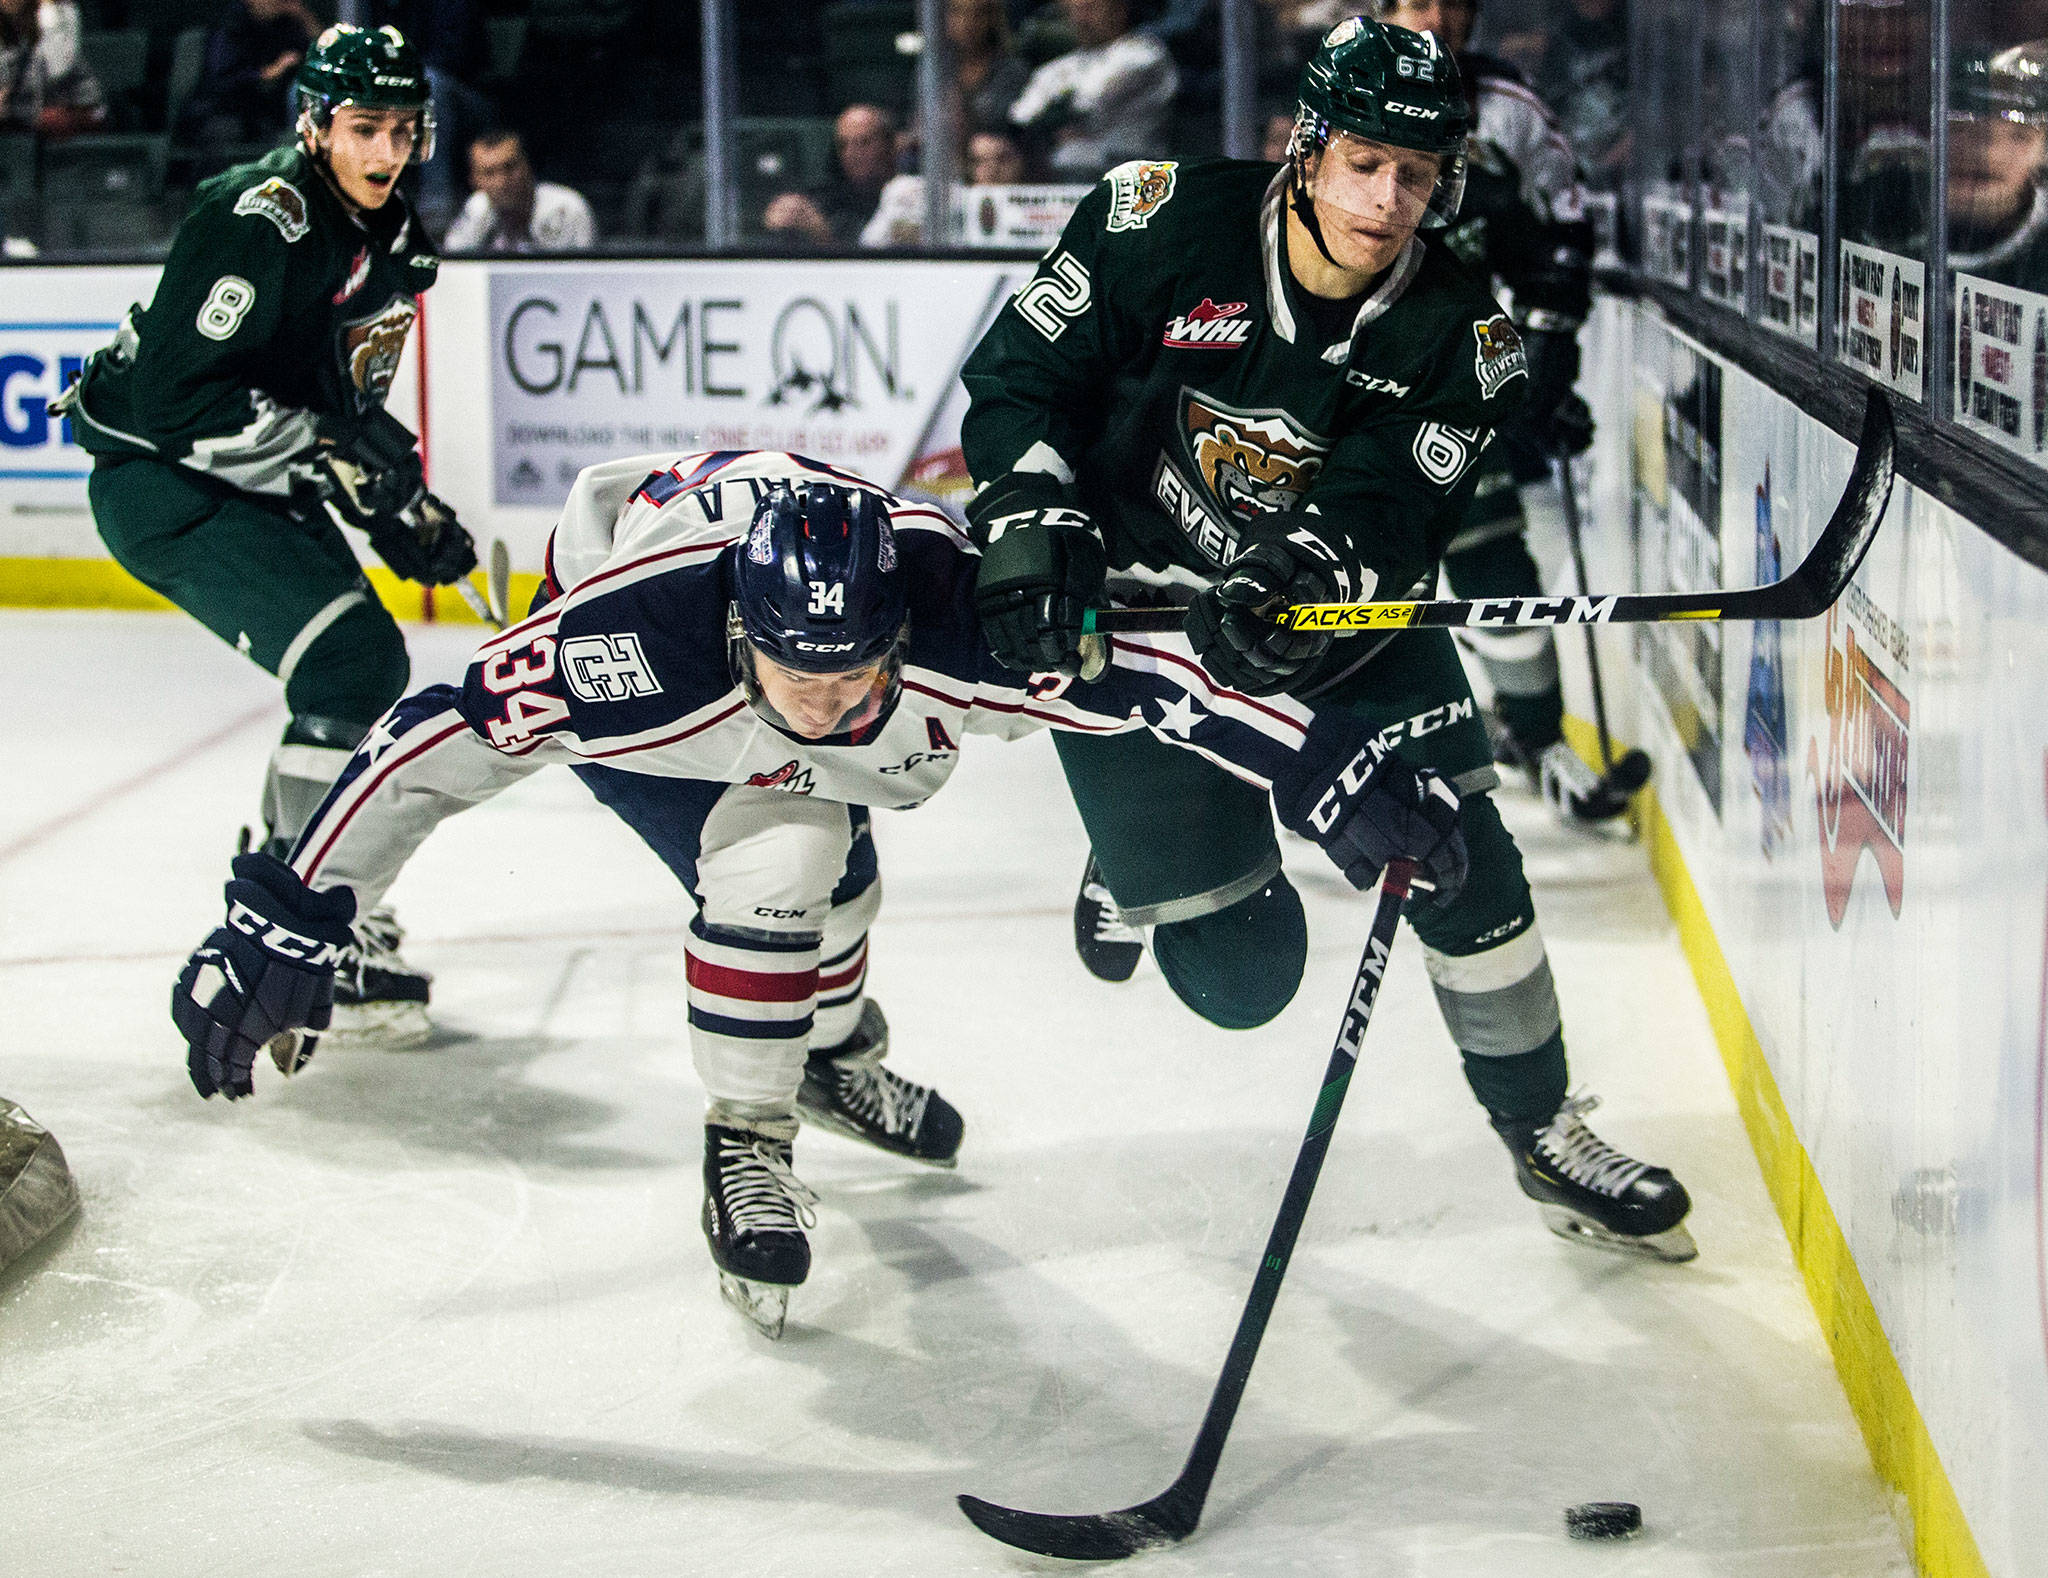 Silvertips’ Michal Gut fights Tri-City’s Sasha Mutala for the puck during the game against the Tr-City Americans on Friday, Sept. 20, 2019 in Everett, Wash. (Olivia Vanni / The Herald)